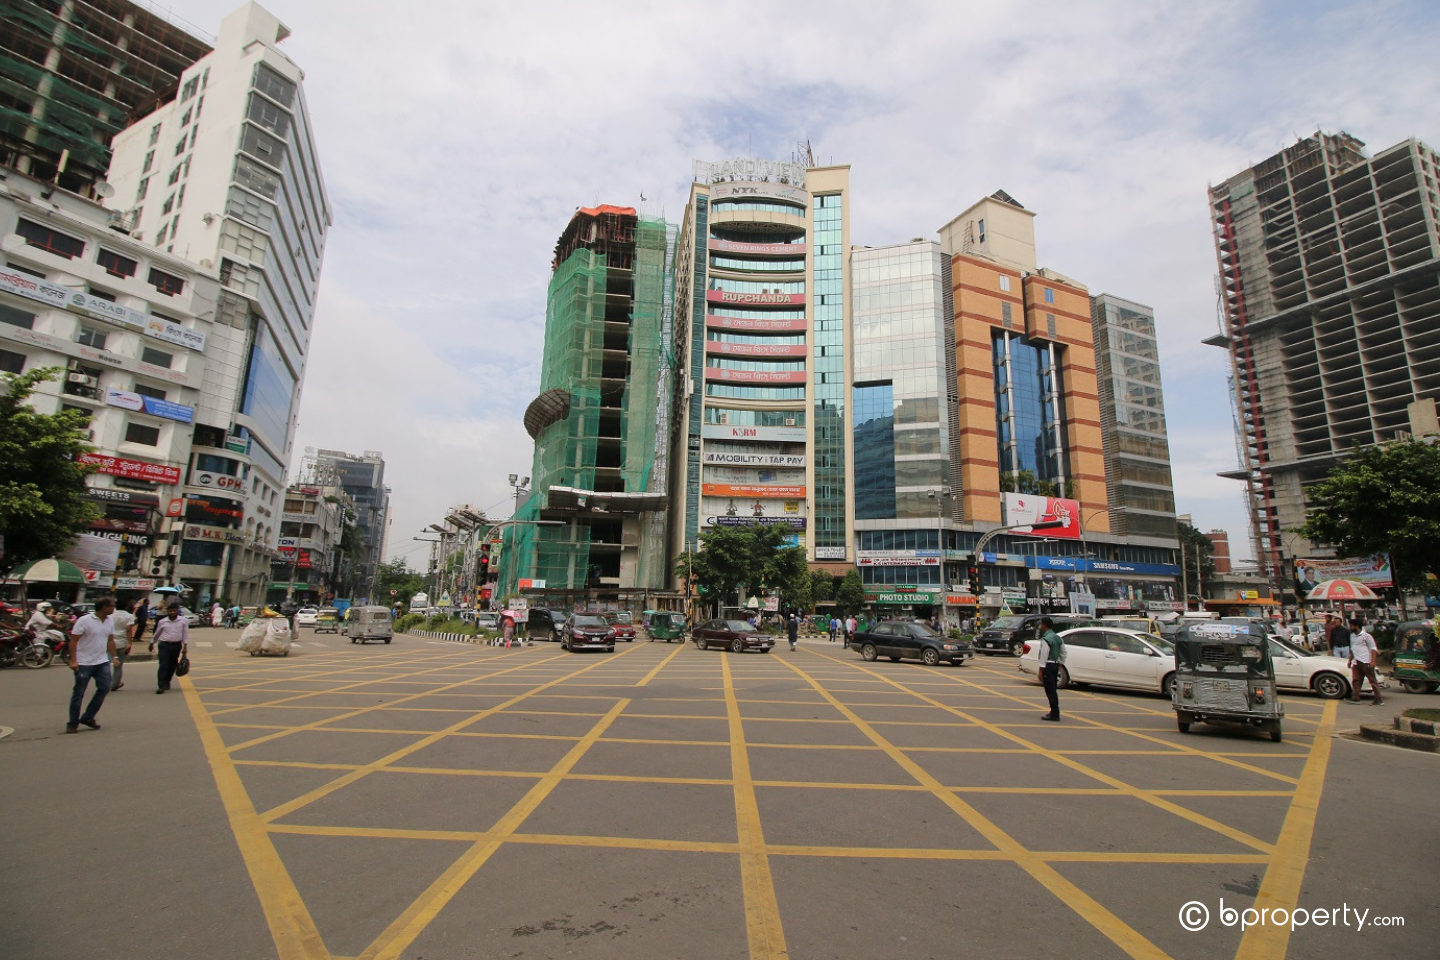 Gulshan is currently the top commercial hub in Dhaka